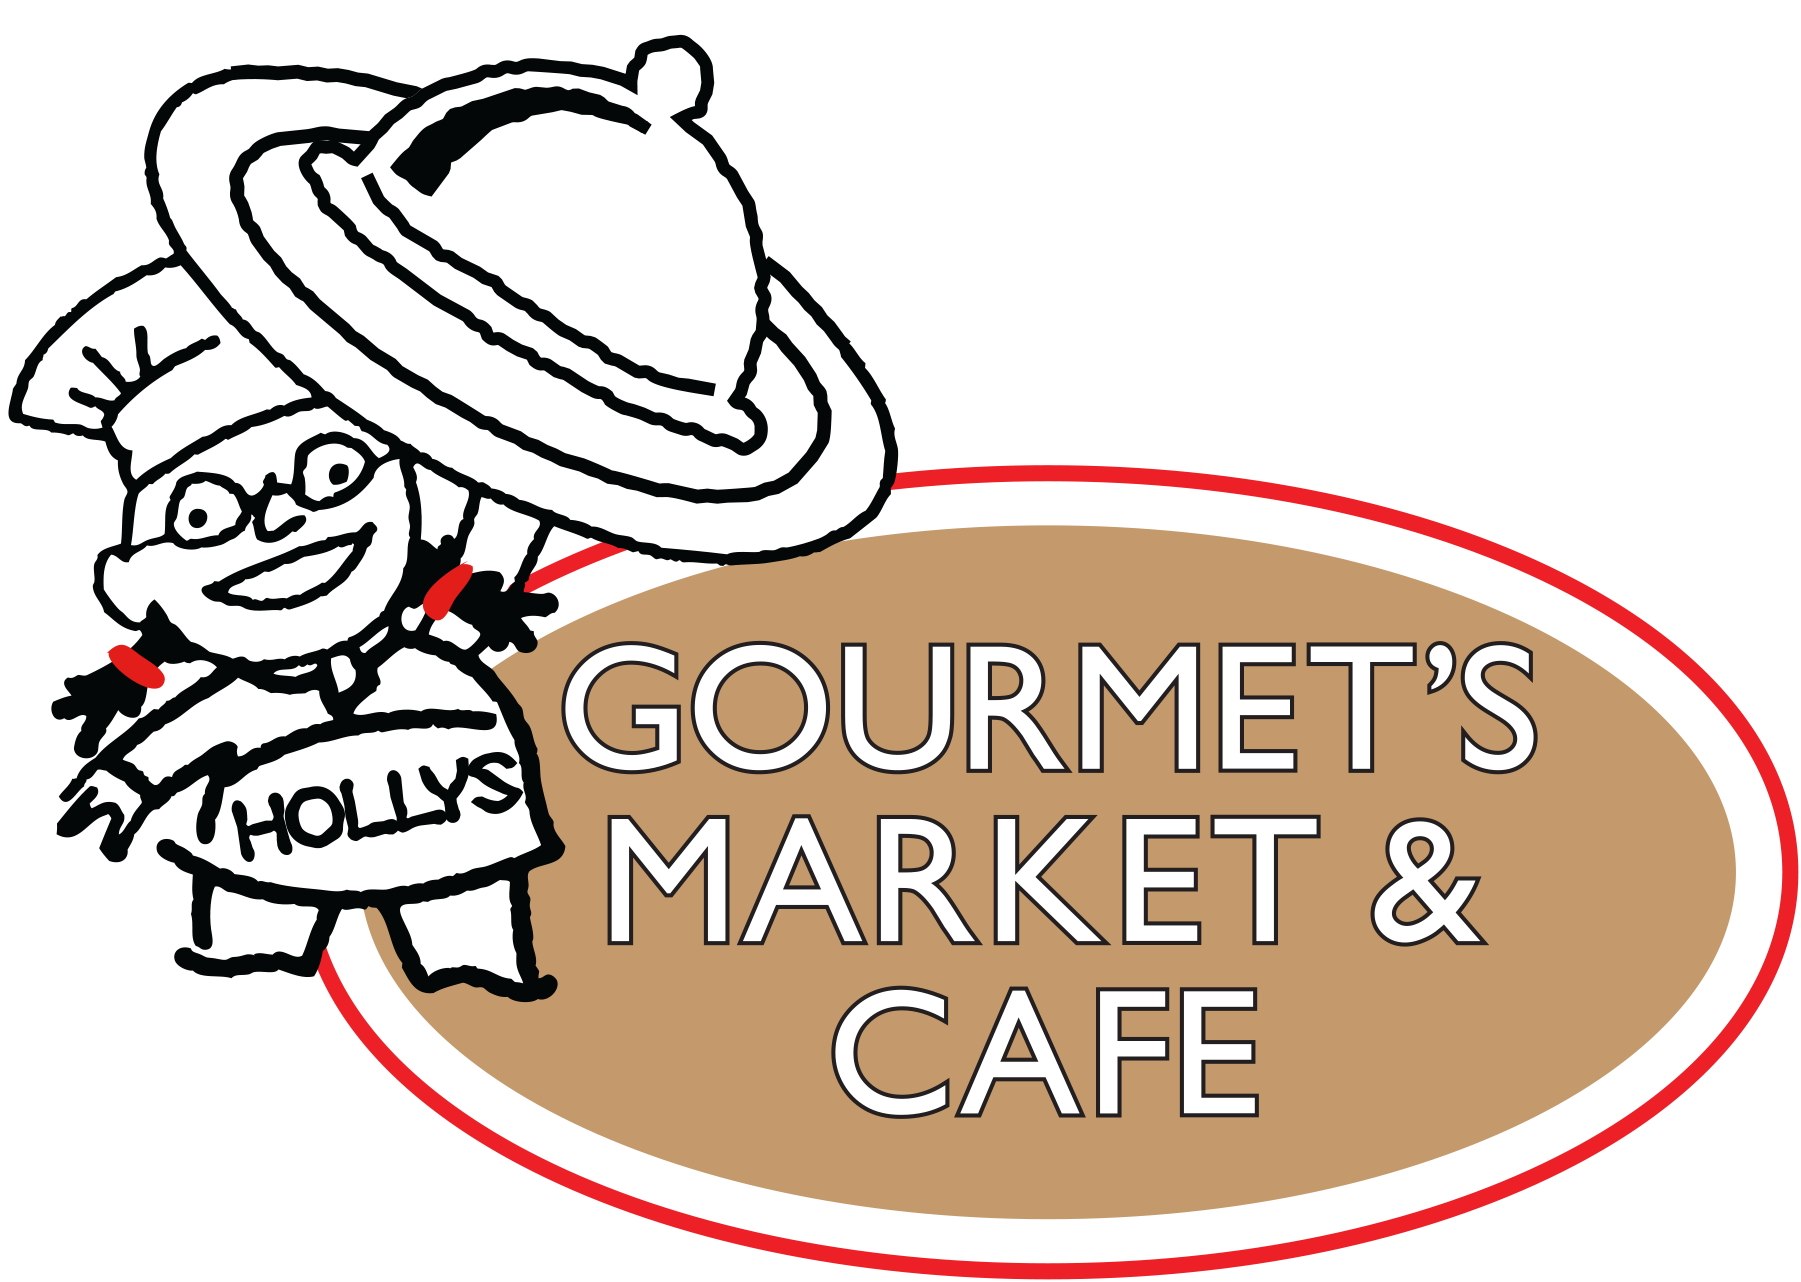 Holly's Gourmet Market and Cafe